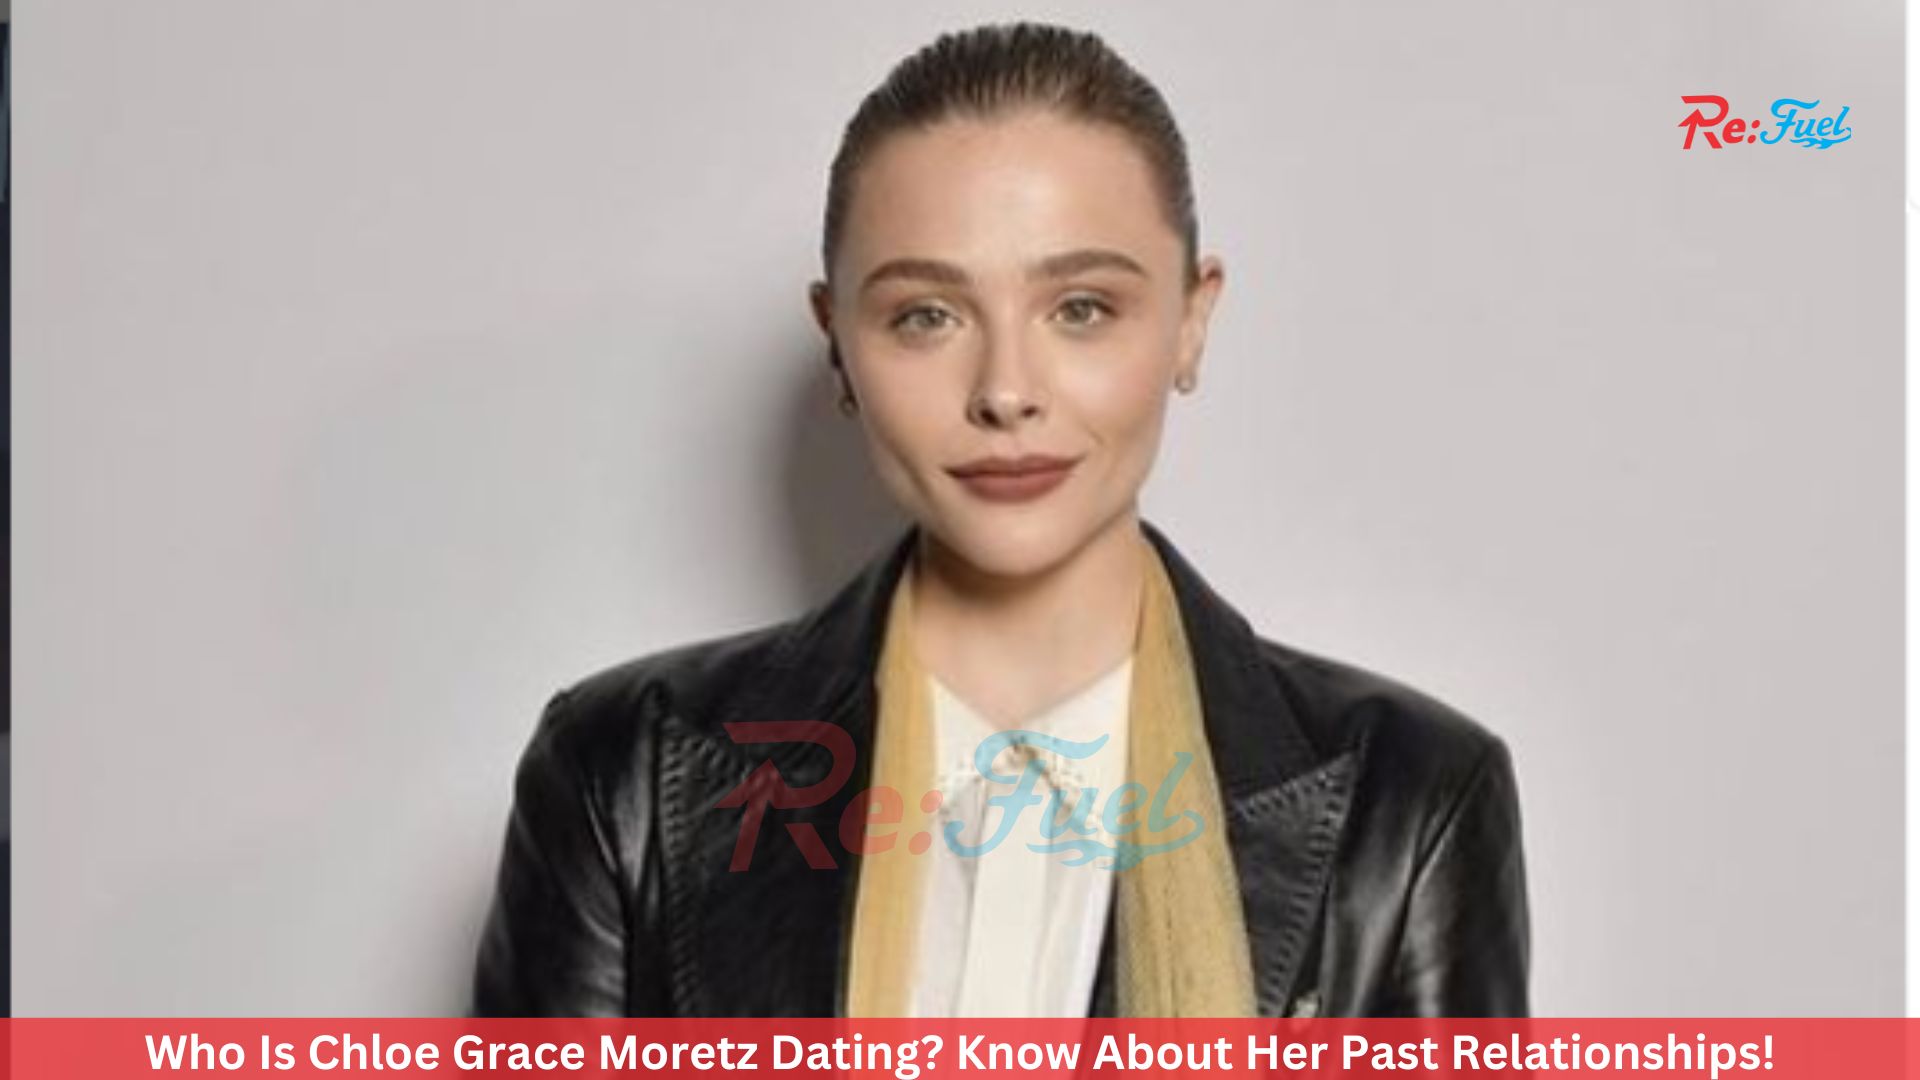 Who Is Chloe Grace Moretz Dating? Know About Her Past Relationships!